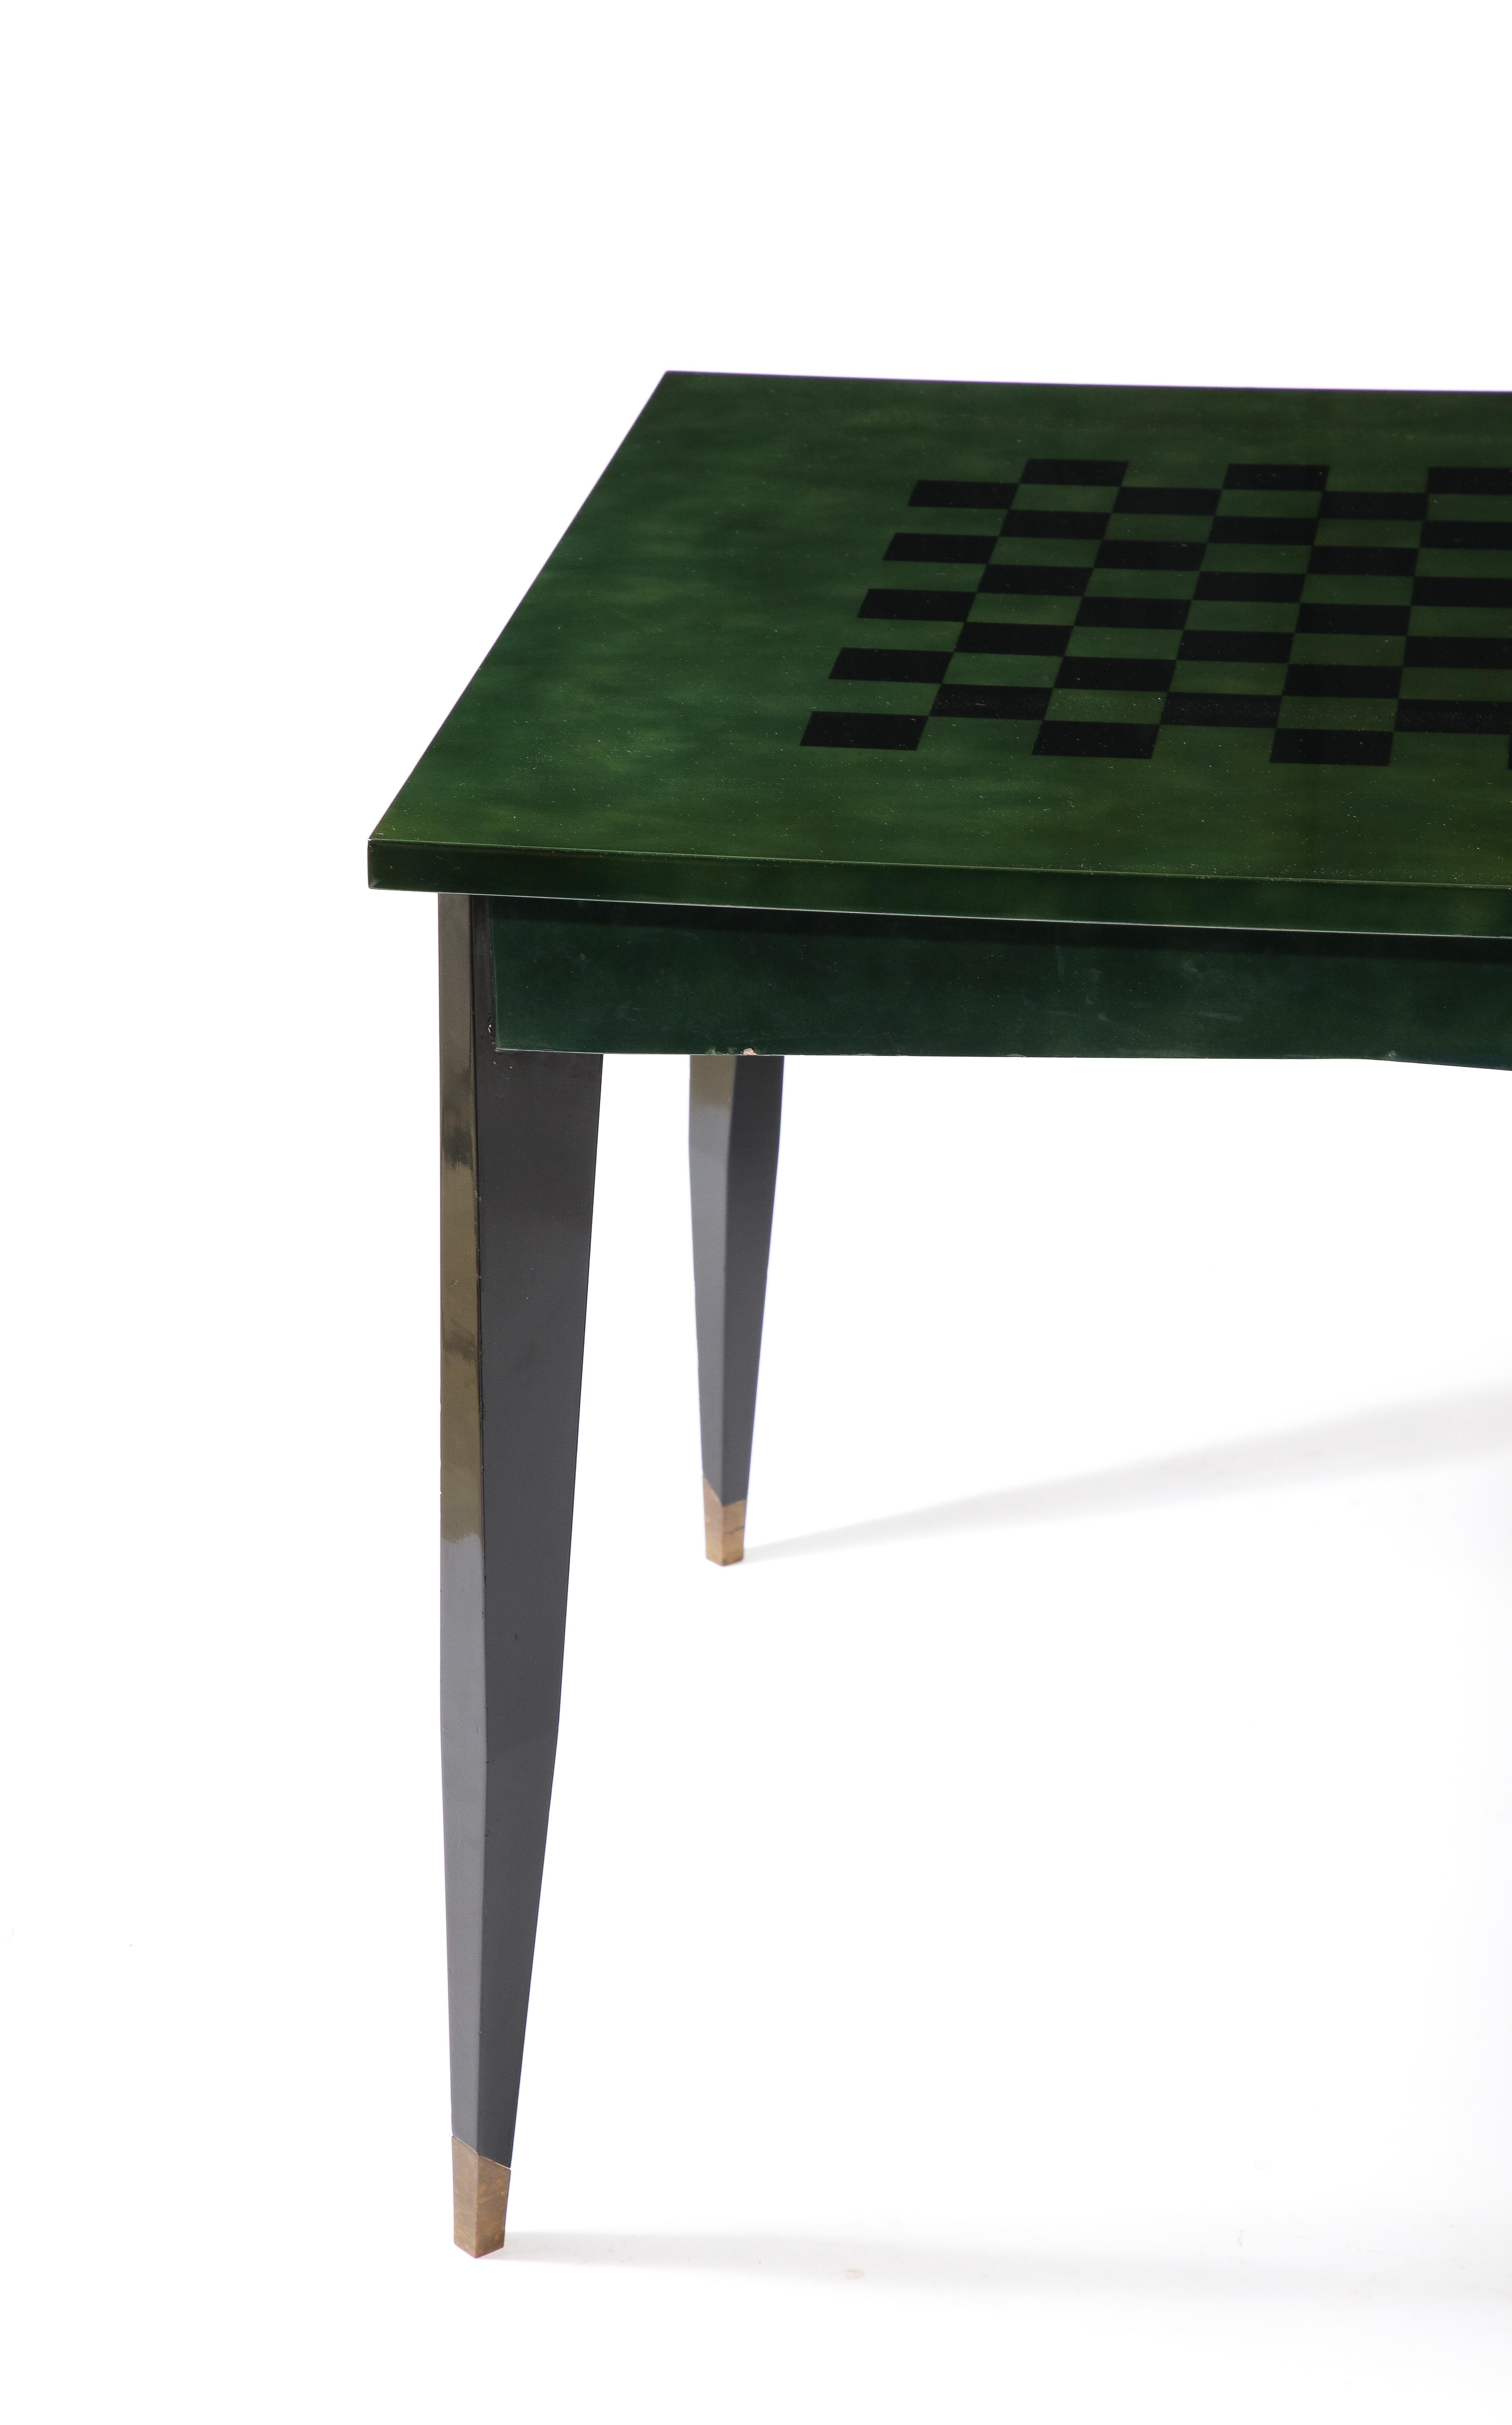 Exceptional game table by Raphael, the legs are black lacquered with brass sabots, and the top is done in Raphael's signature Beka green ombré lacquer with the chessboard design embedded in the middle. The sides have pull-out trays to hold a drink